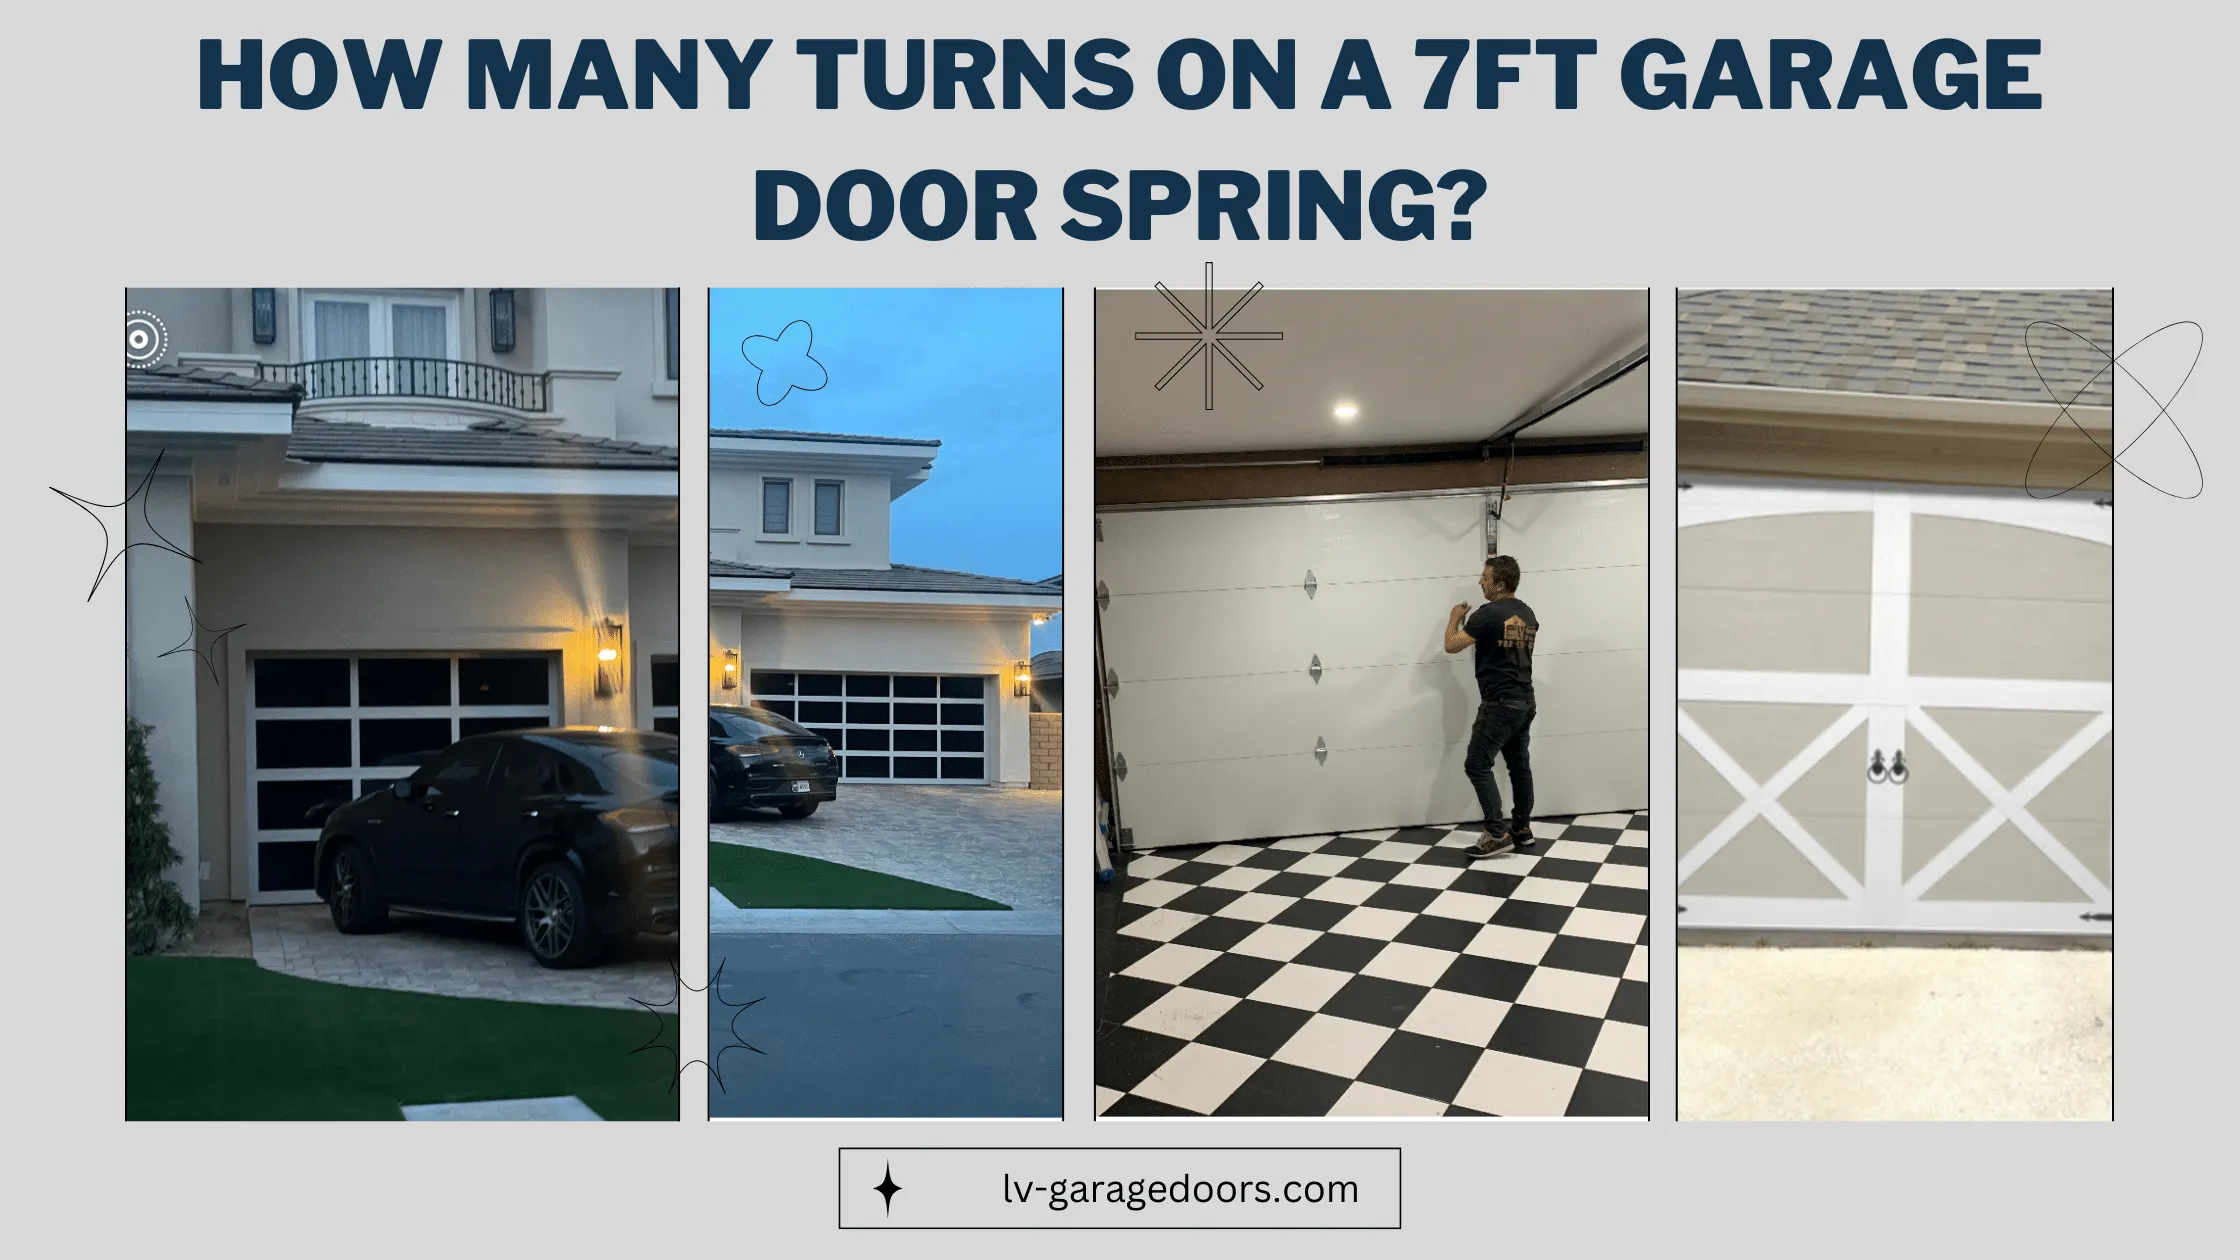 How Many Turns On A 7ft Garage Door Spring